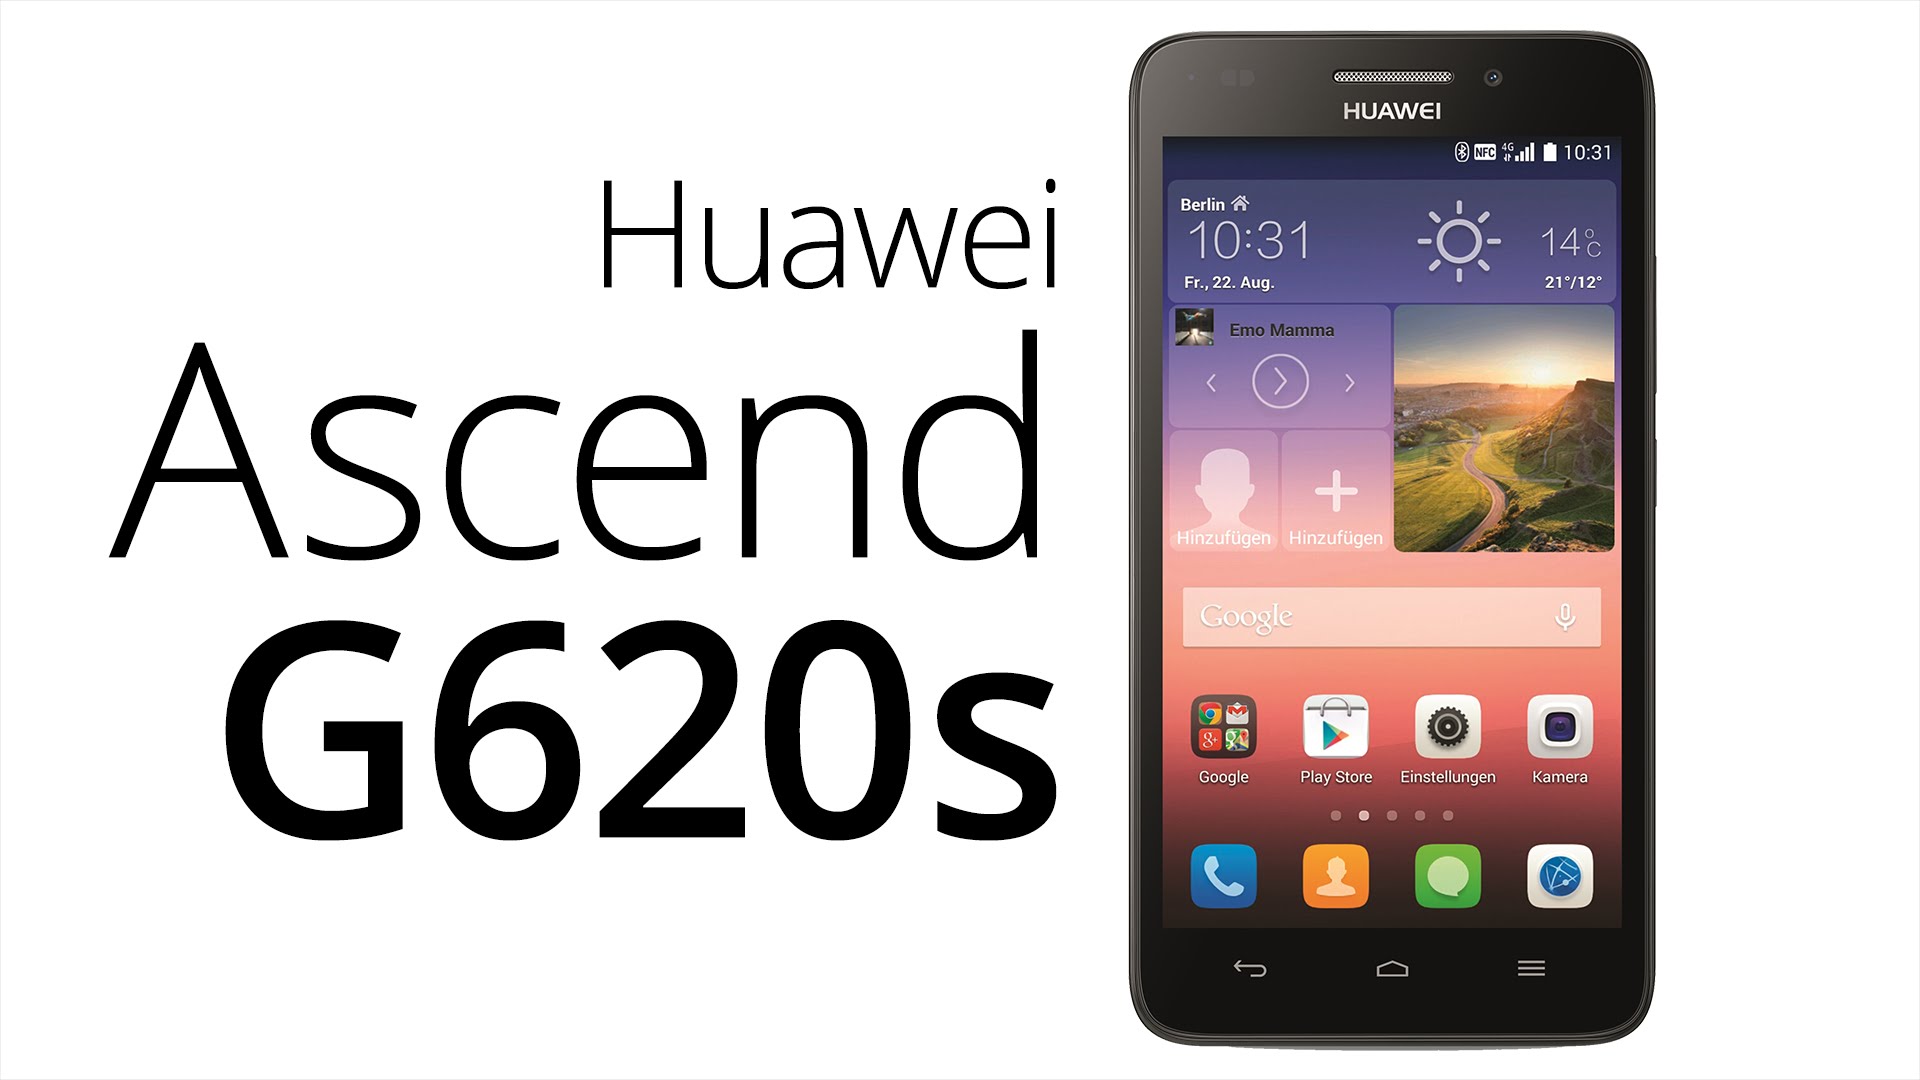 Huawei Ascend G620s 